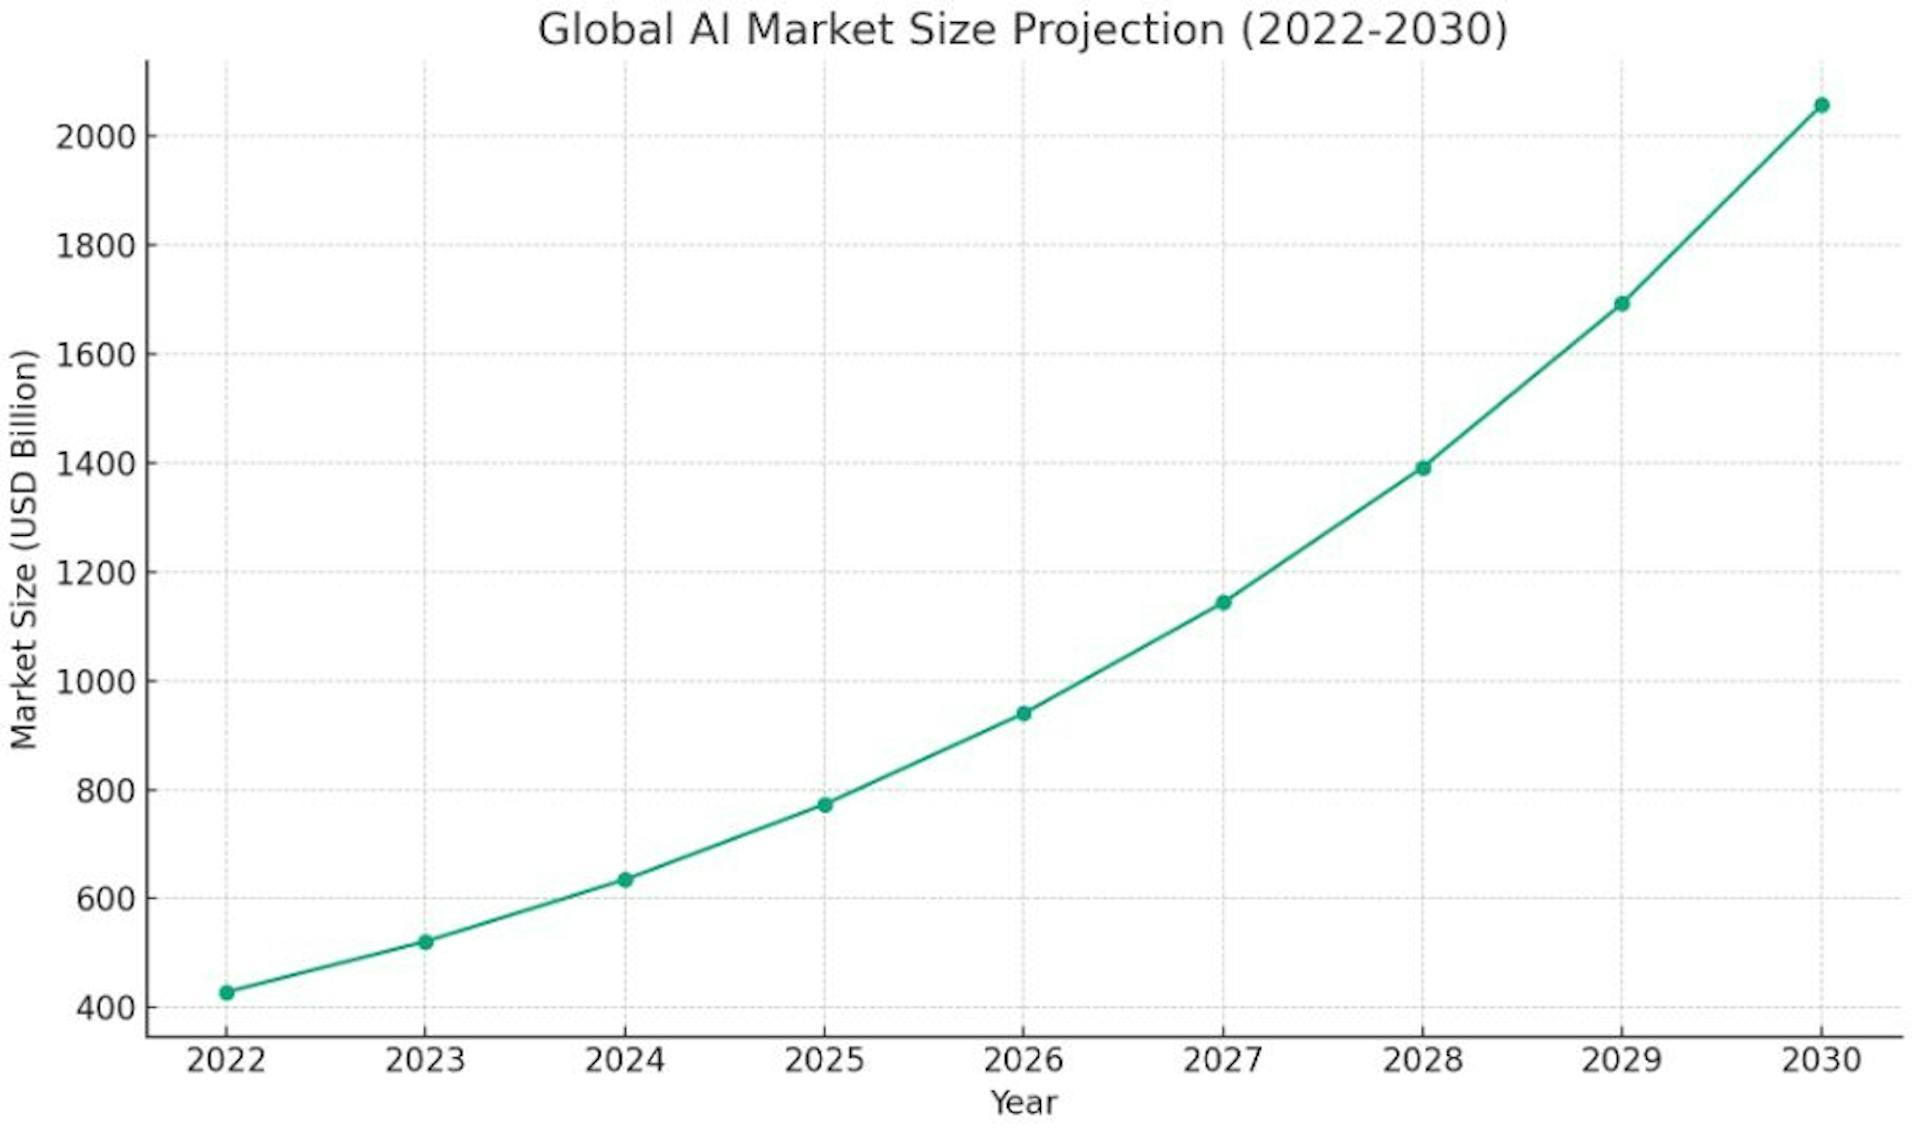  Graph illustrating the projected growth of the global AI market size from 2022 to 2030.